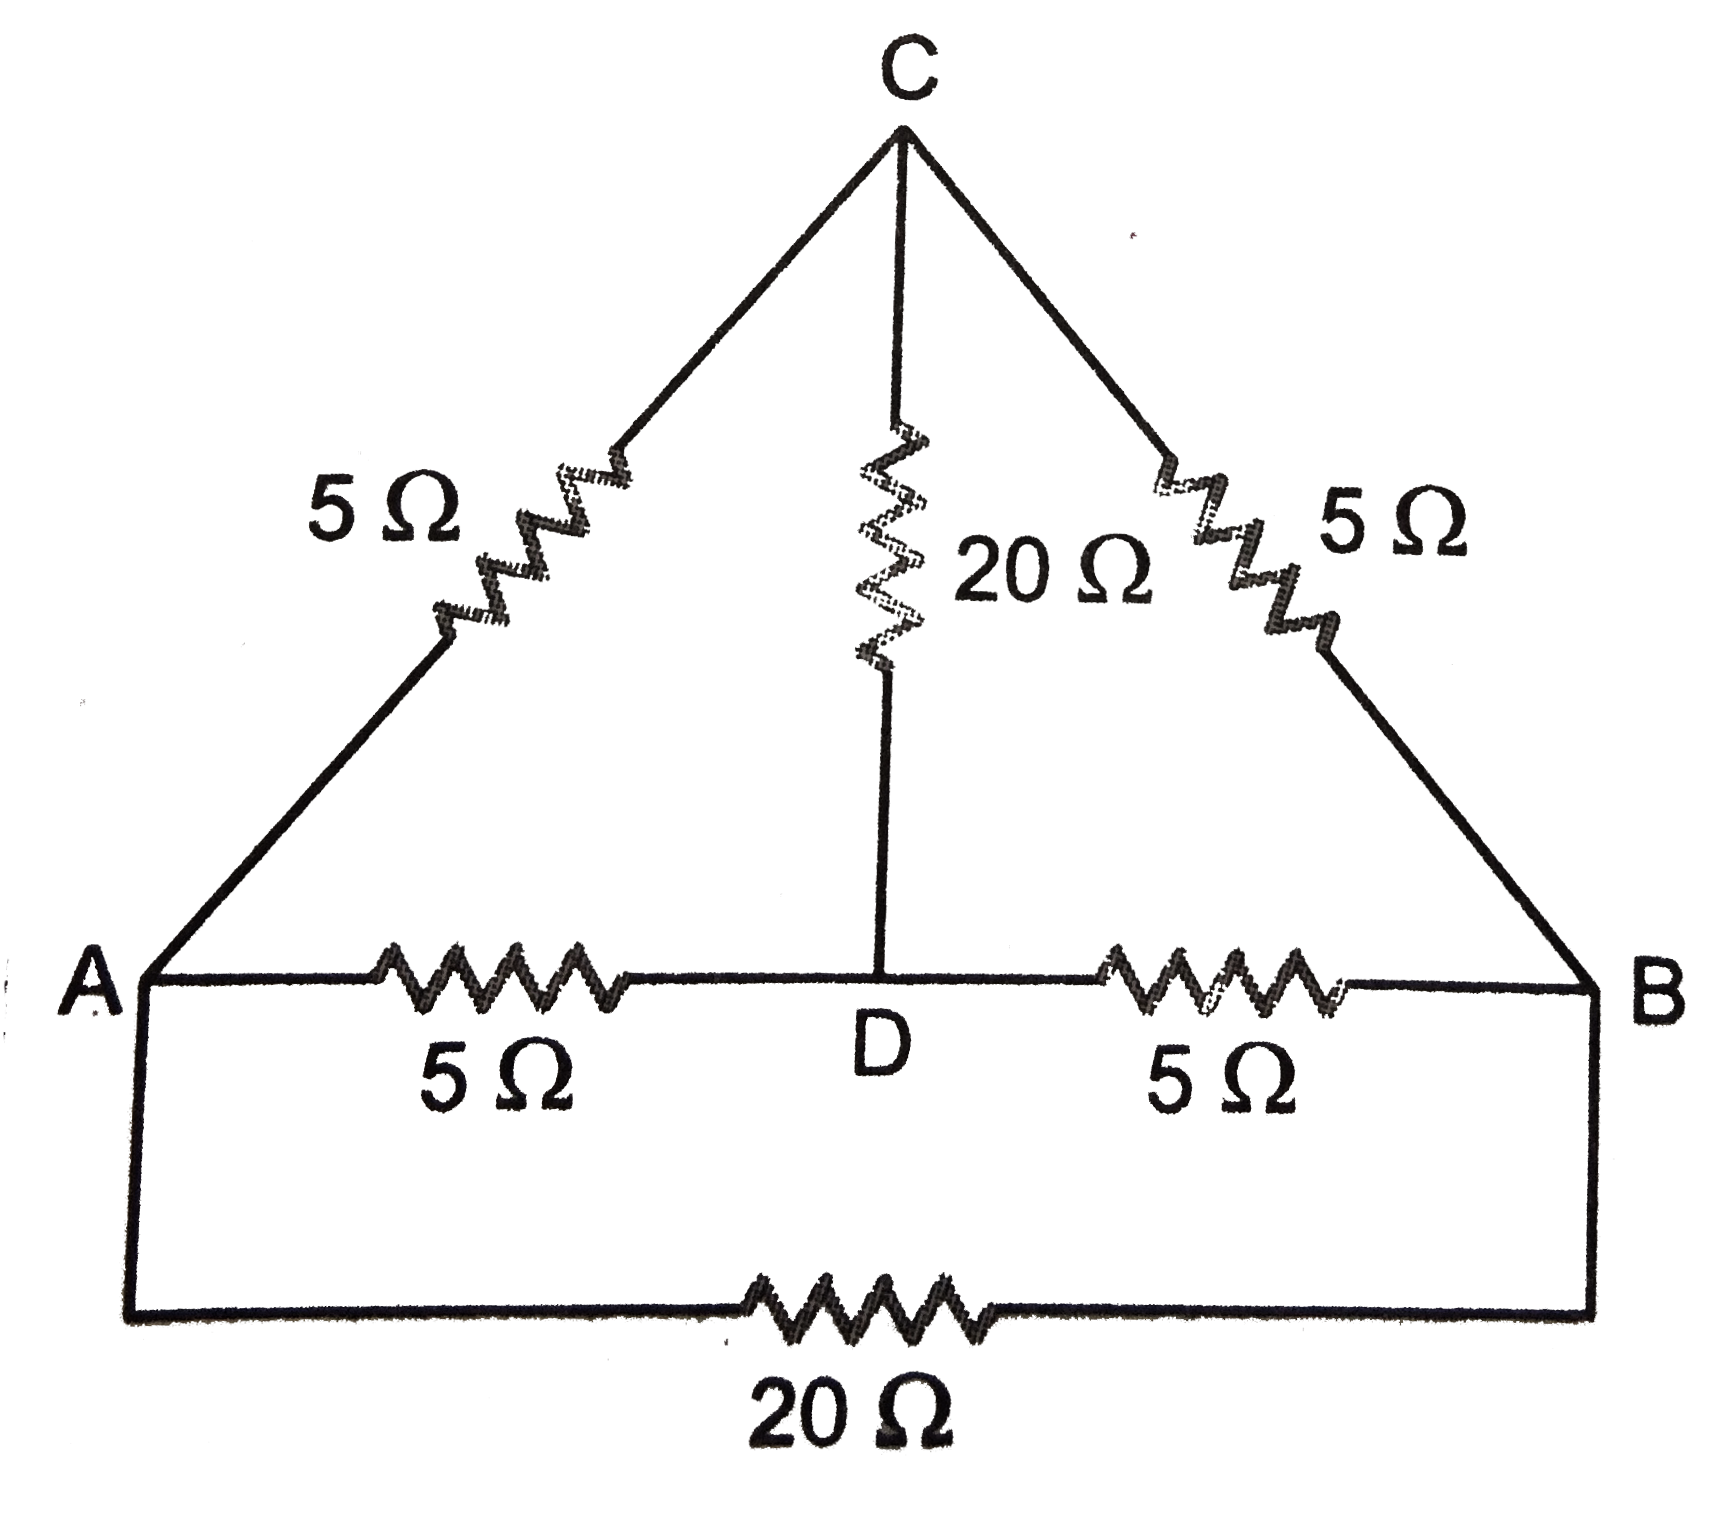 Calculate the resistance between the points A and B of the networks shown in figure